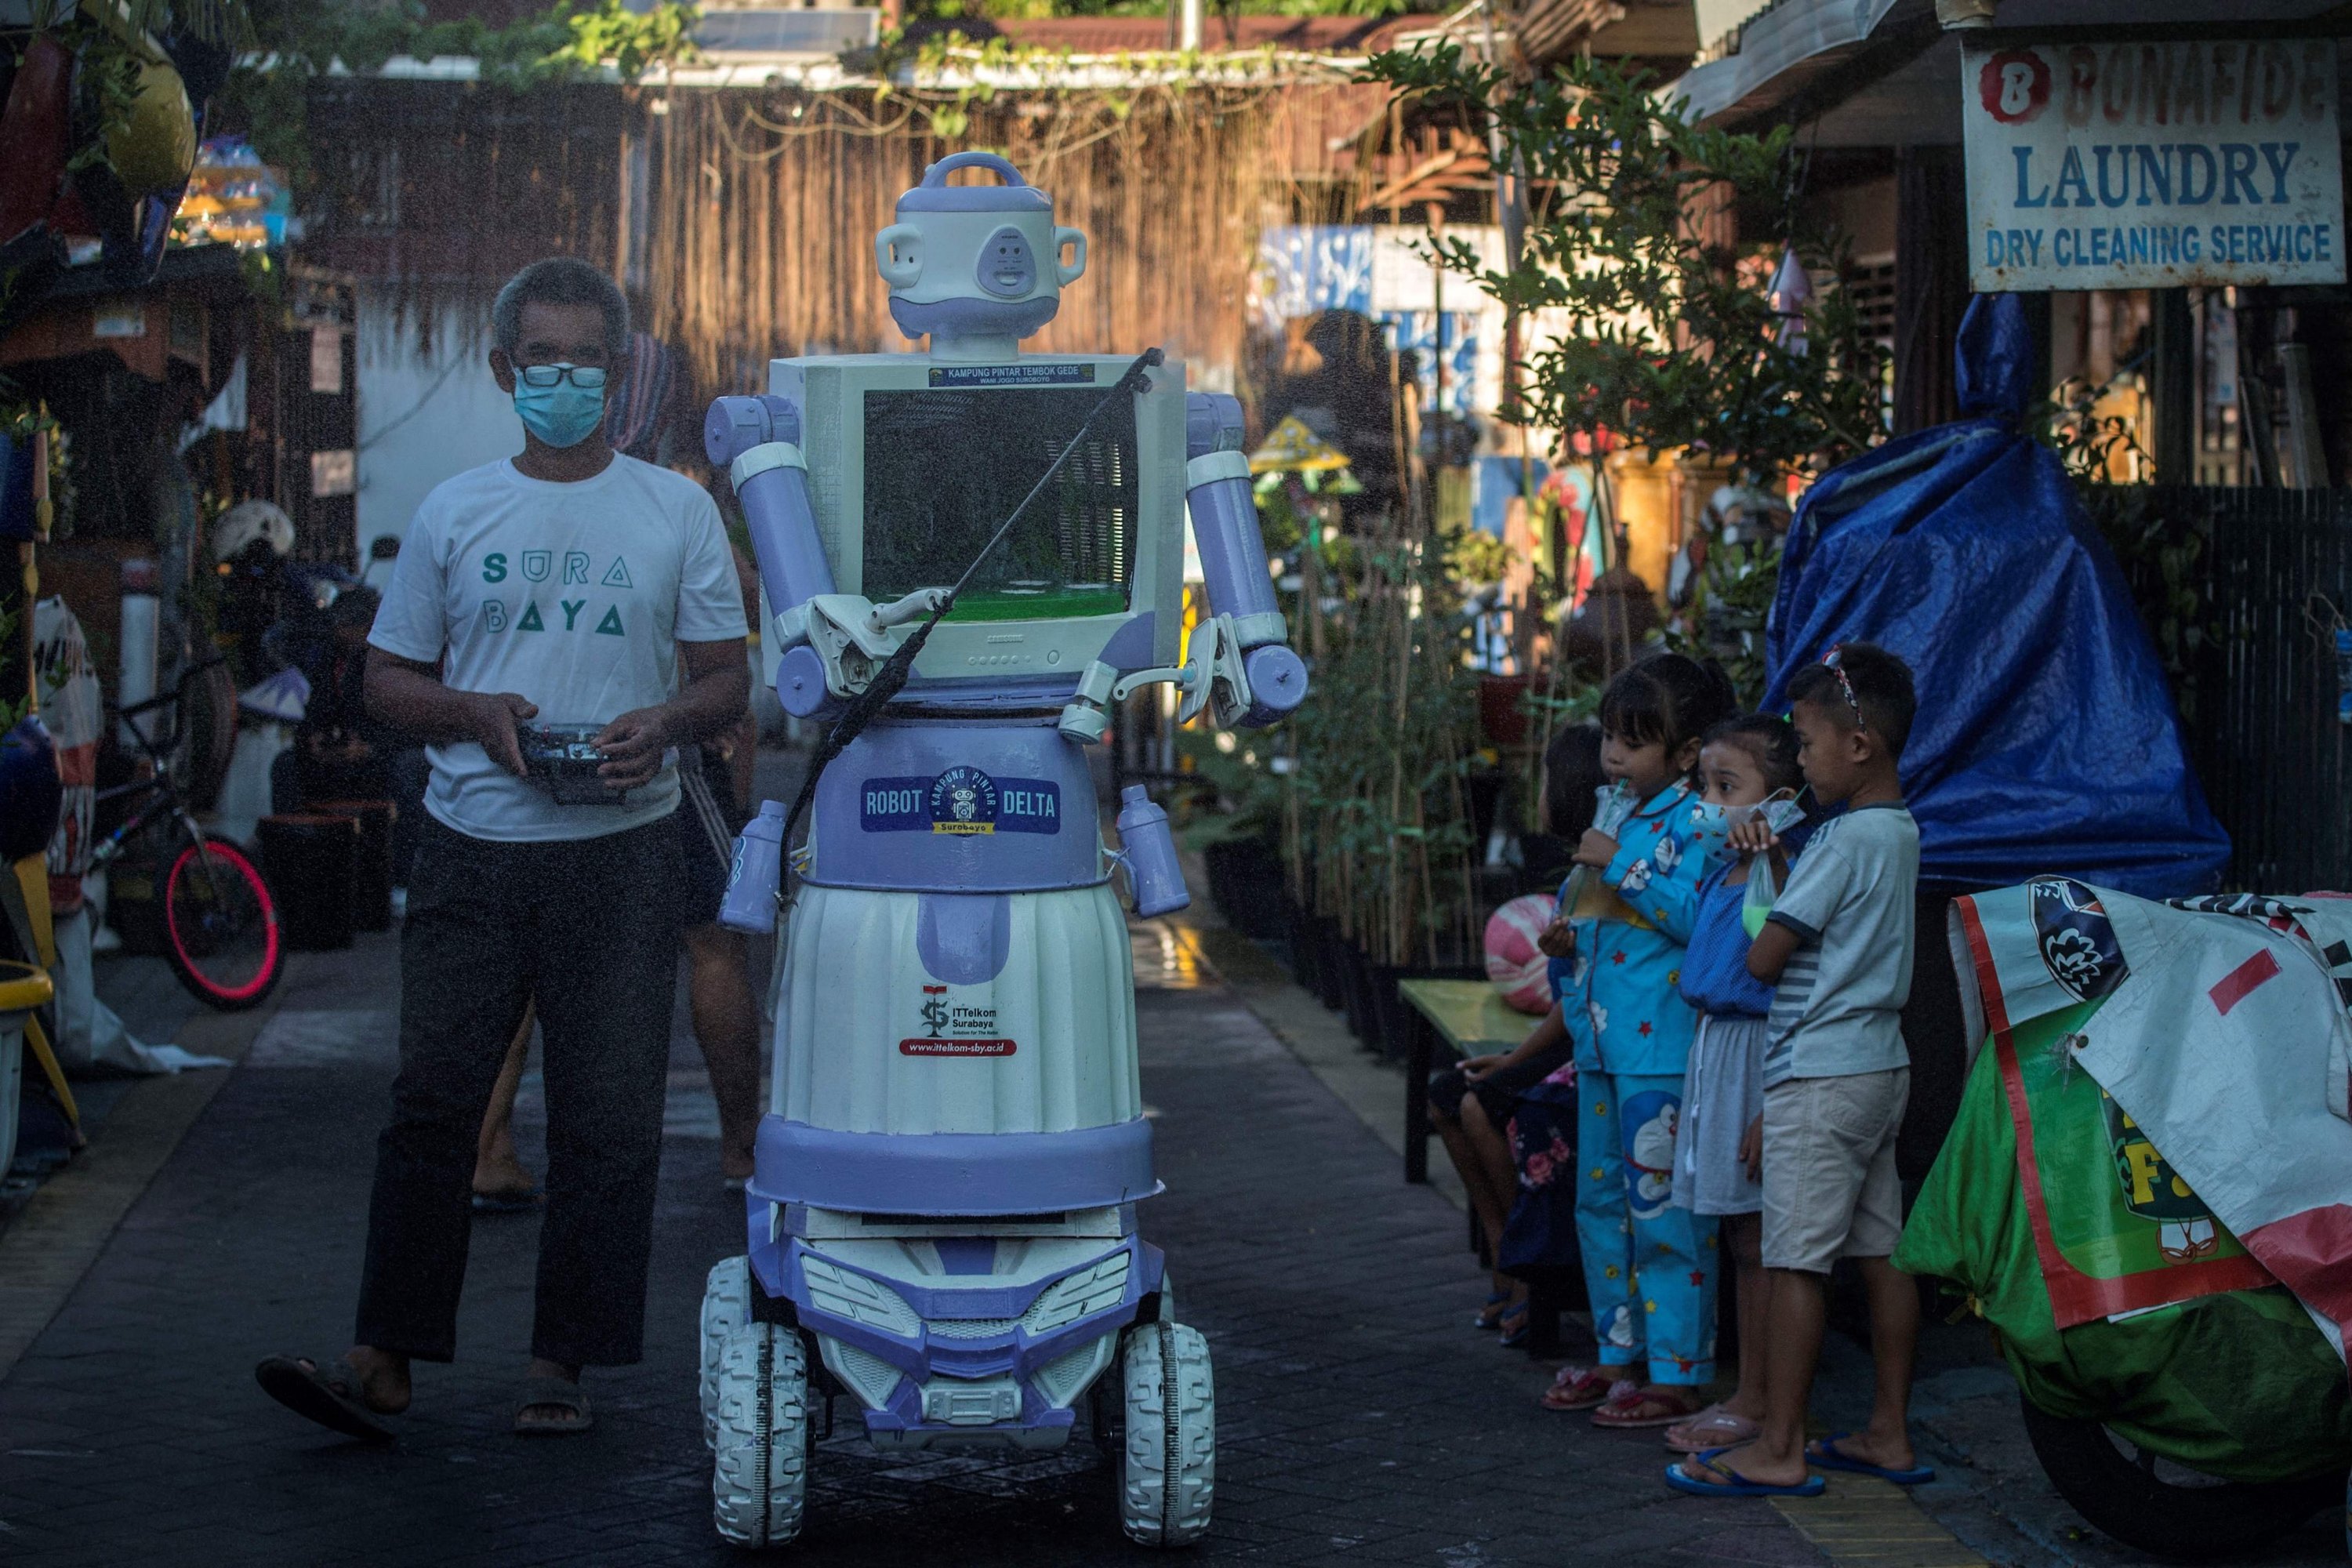 Aseyanto, who goes by one name only, operates a disinfection robot named Delta, which he created from recycled household goods, at a neighborhood in Surabaya, East Java province, Indonesia, on July 28, 2021. (AFP Photo)